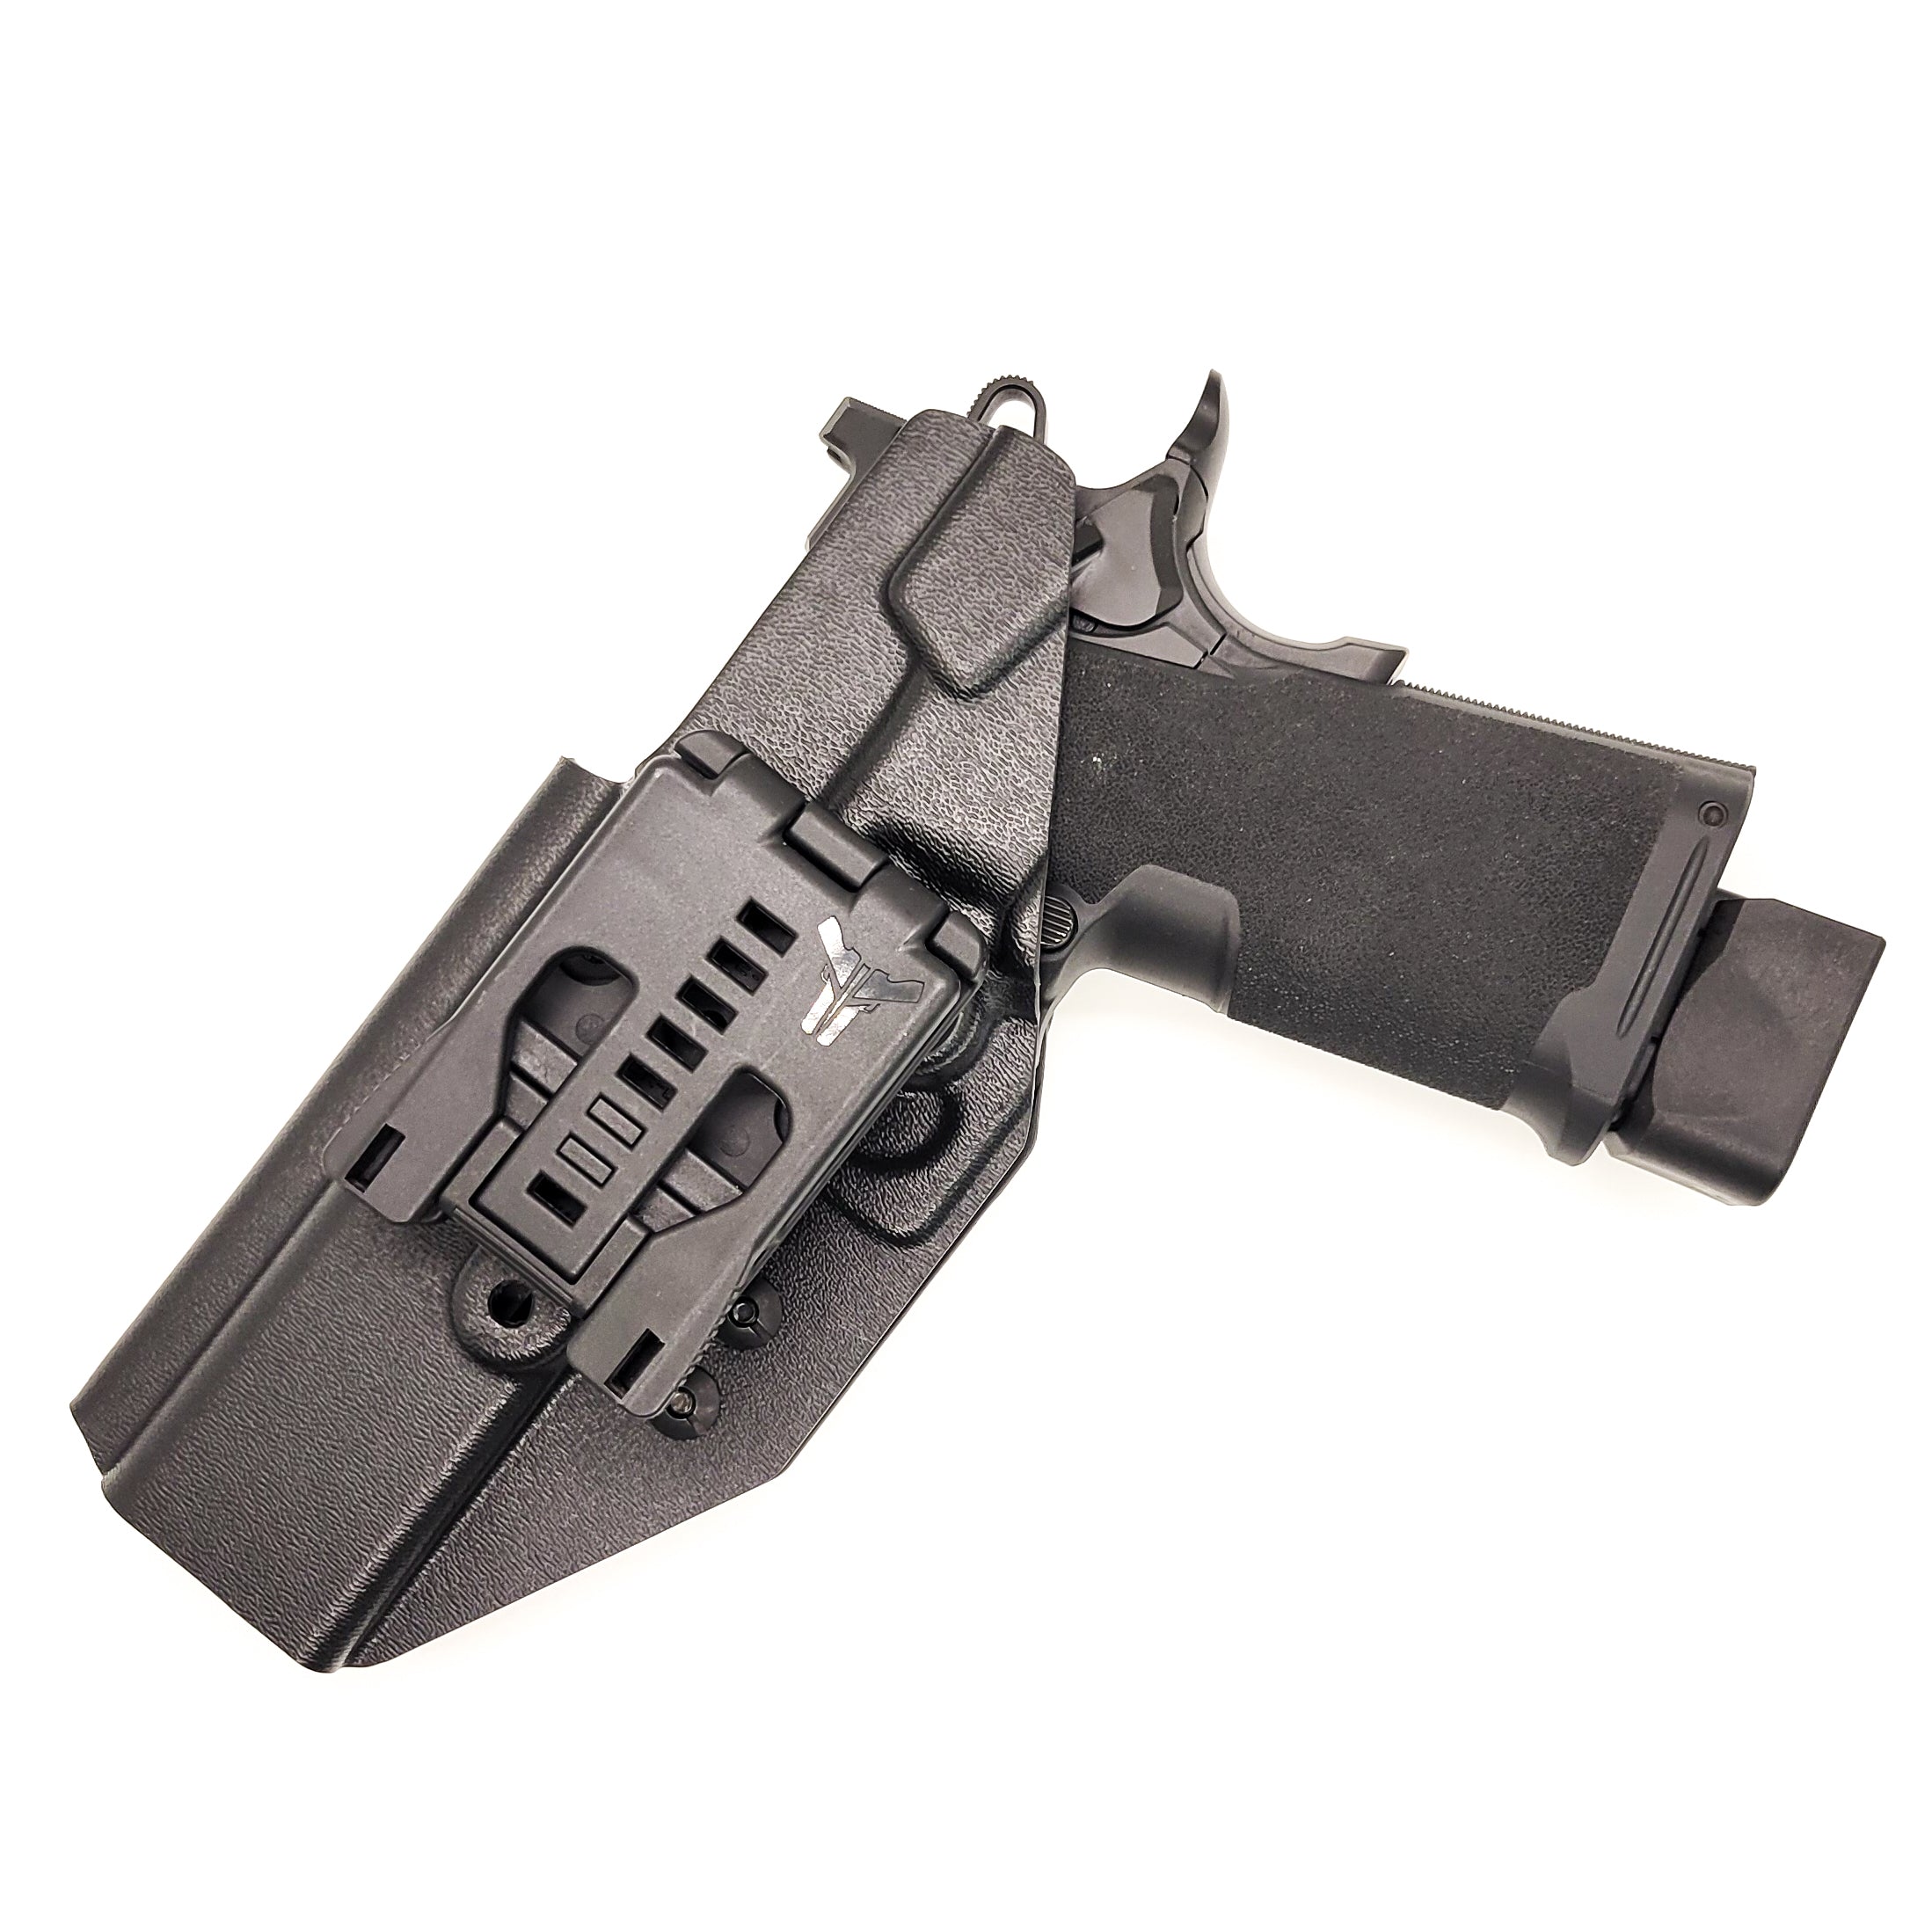 For the best Outside Waistband kydex Holster designed to fit the Springfield Armory 1911 DS Prodigy 5" & 4.25" with or without a red dot sight mounted to the pistol, shop to Four Brothers Holsters.  Full sweat guard, adjustable retention, minimal material, & smooth for reduced printing. Proudly made in the USA 